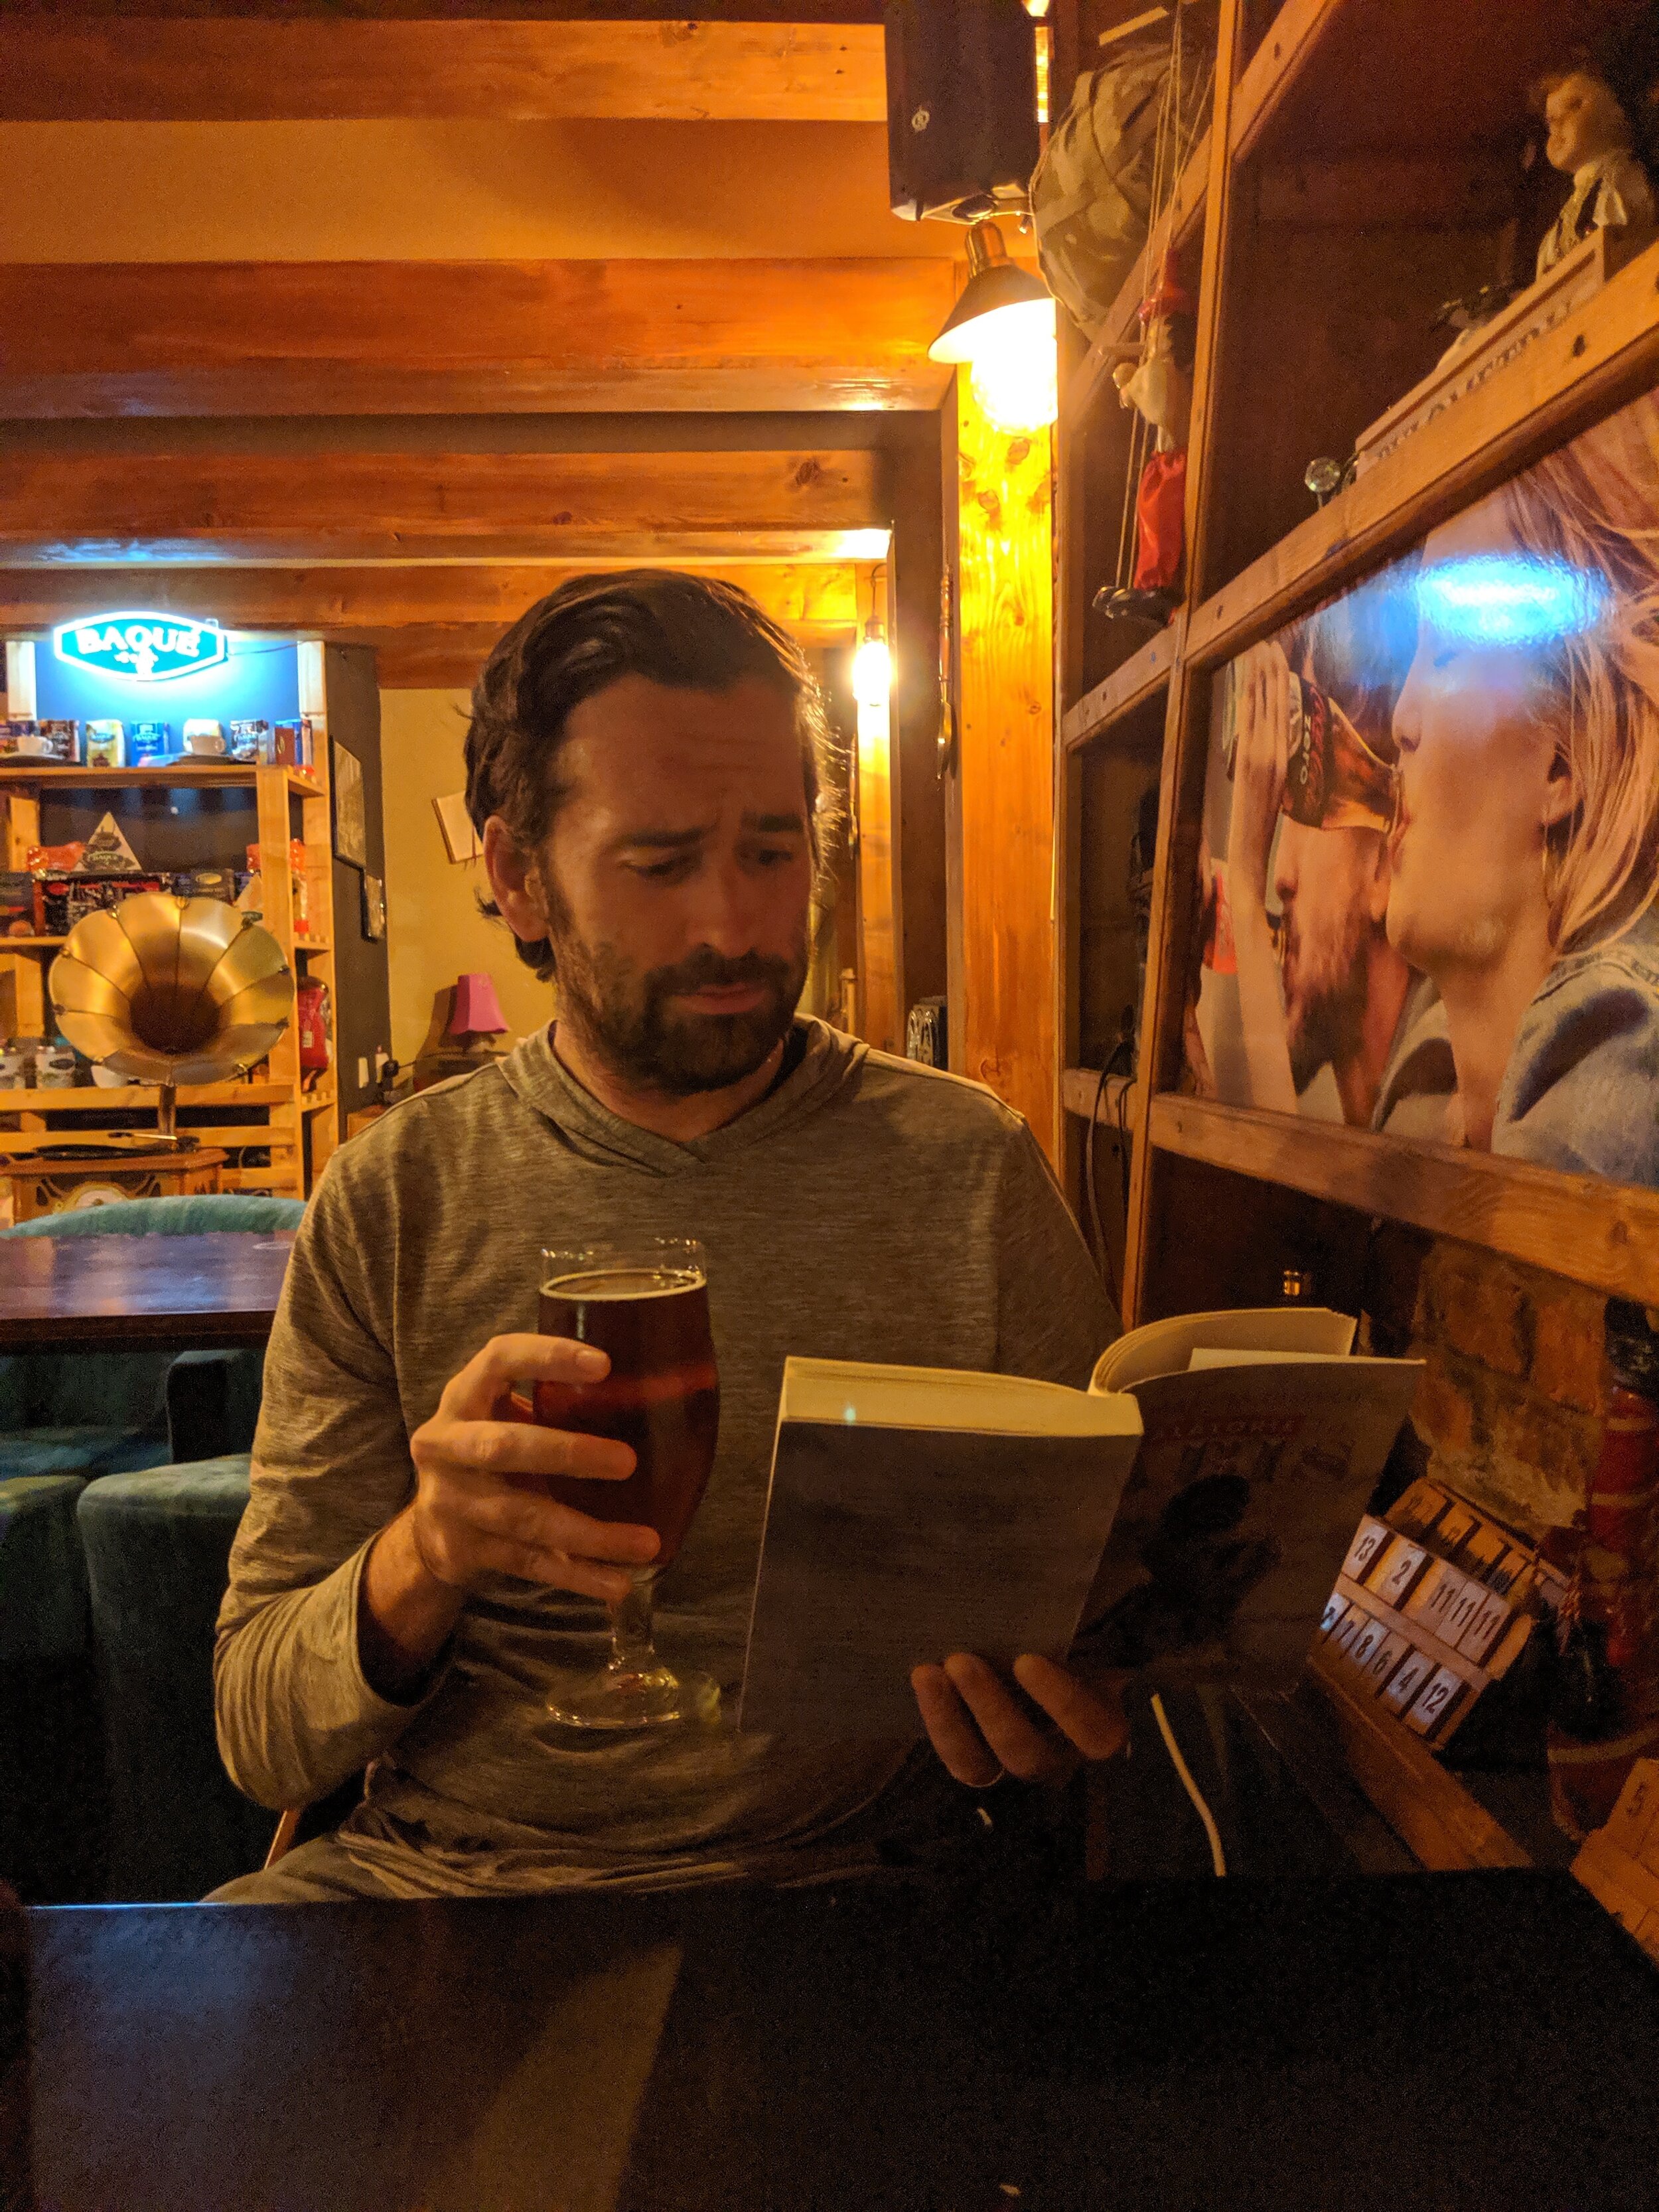 Thanks Jake A.! We enjoyed your drink at a library bar. I wanted to look cool and act like I was reading a book while consuming my beer.